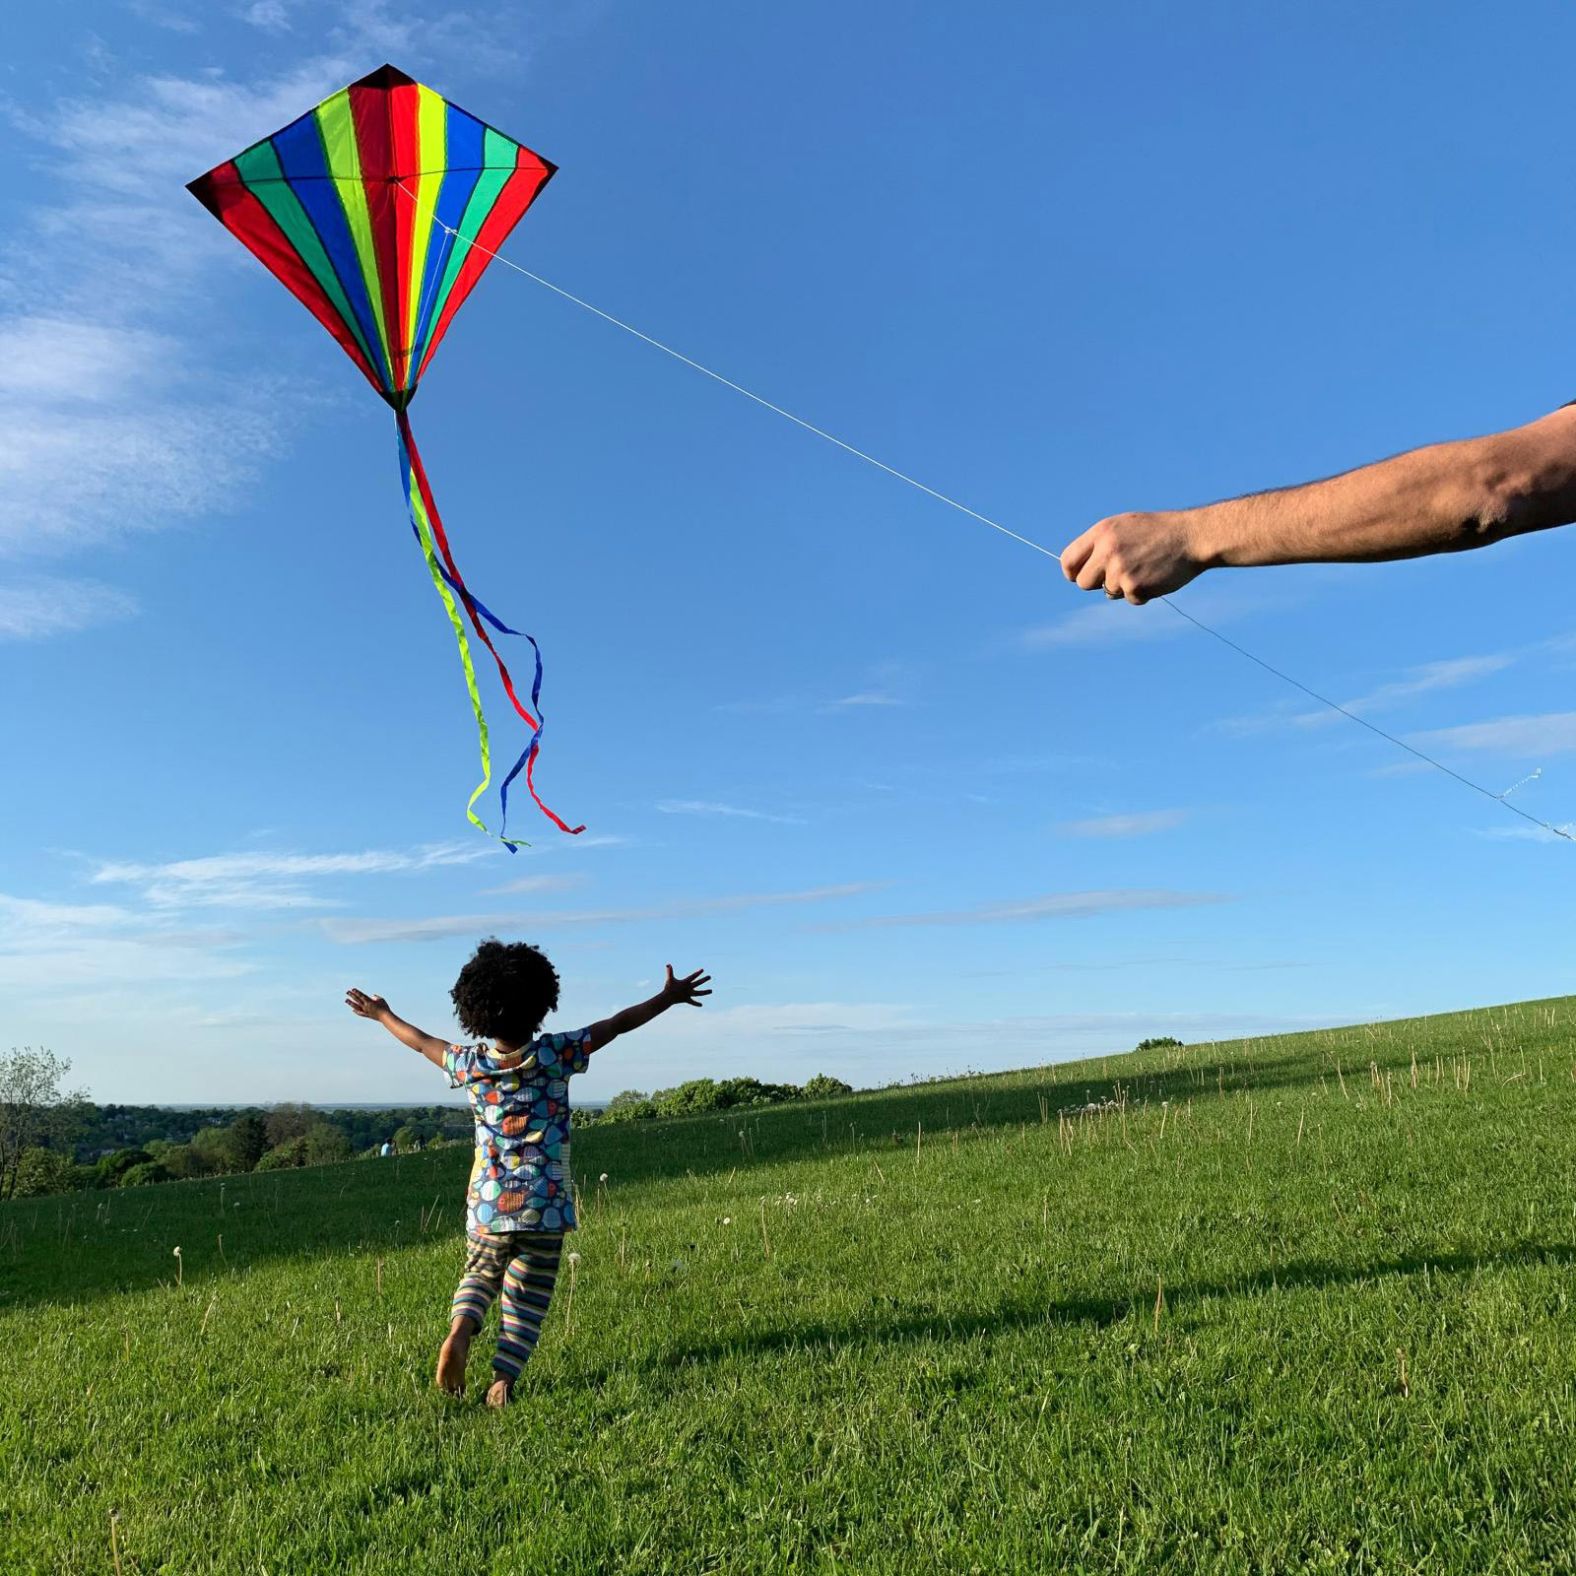 <a href="http://www.amytoensing.com/" target="_blank" target="_blank">Amy Toensing</a> photographed her daughter,  Elsa, chasing a kite flown by her husband. "We were fortunate enough to become a family through adoption," she said. "Being a mom challenges, fulfills and humbles me every day. My daughter has opened my world and makes me want to know more about myself so I can be more present with her. She is the love of my life."